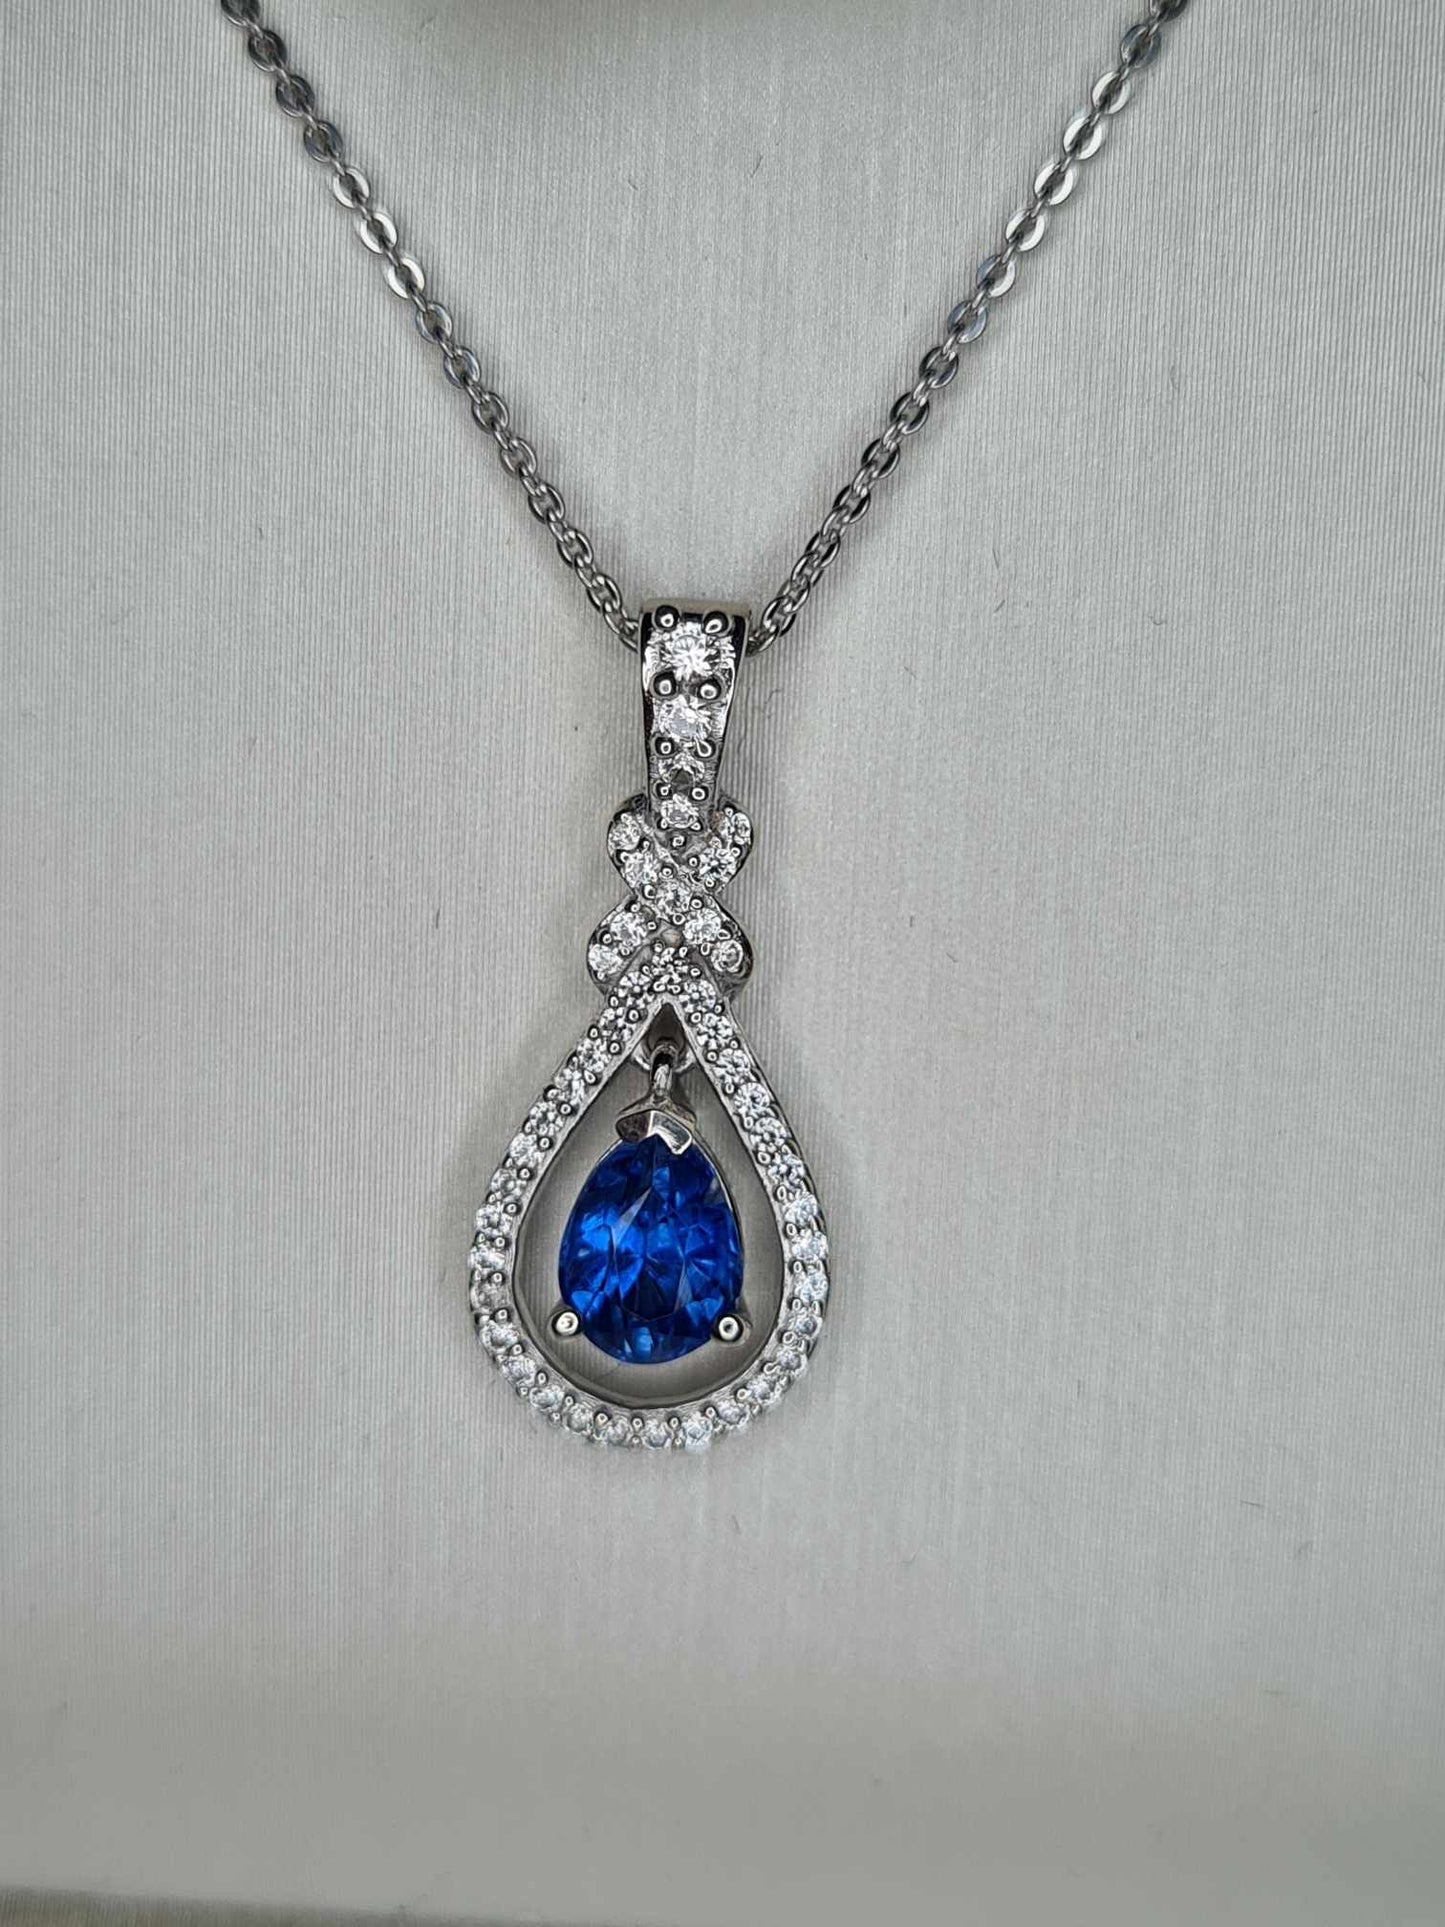 1ct Natural Himalayan Kyanite & White Zircon Necklace 925 Sterling Silver